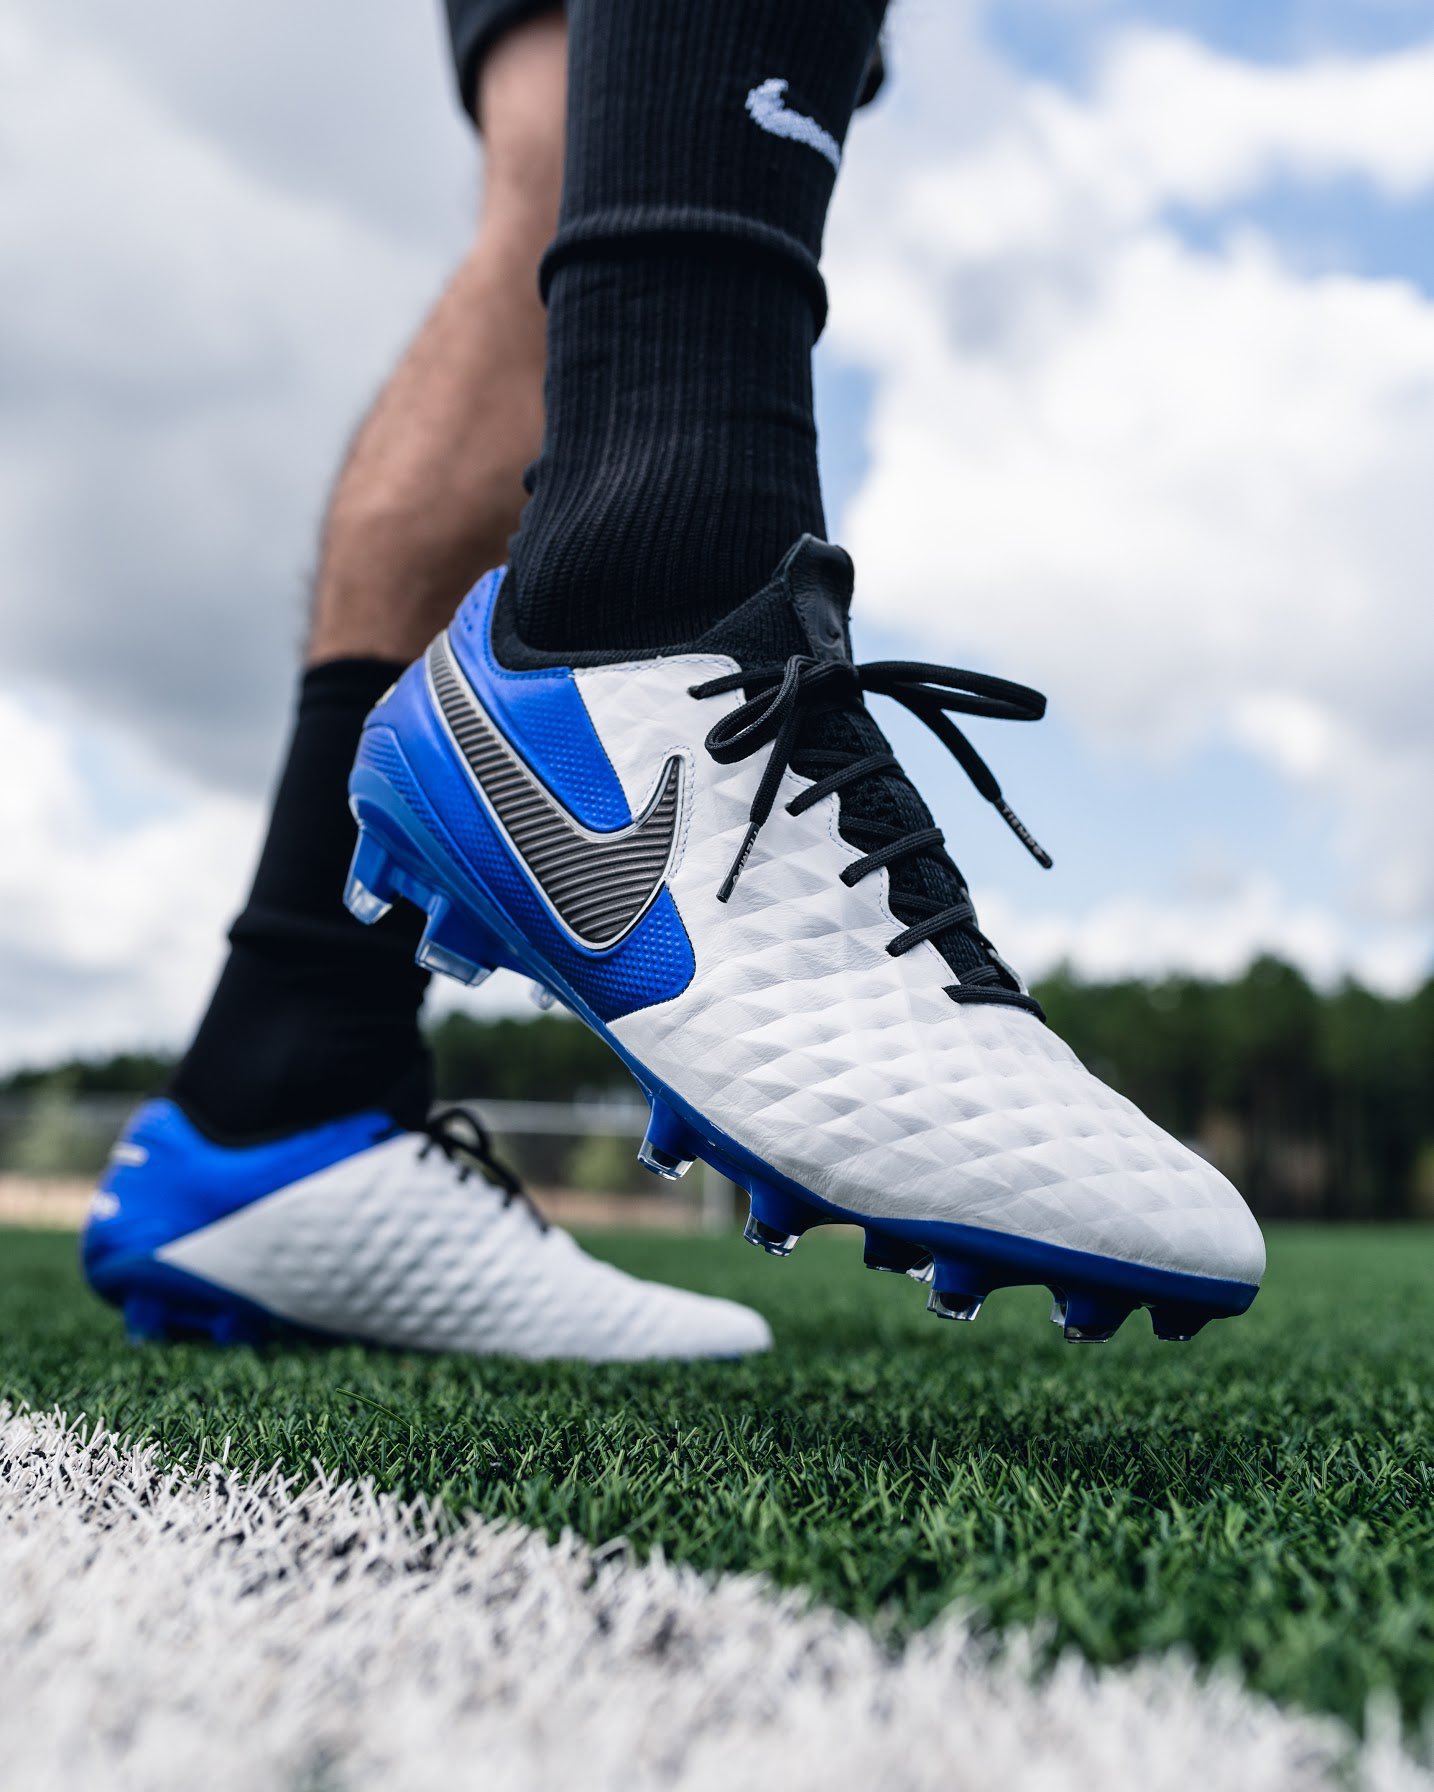 PROFF on Twitter: "Nike Tiempo Legend 8 Elite FG Daybreak: This boot is used by players such as Ramos, Gerard Pique and Virgil Van Dijk. This is a football boot with